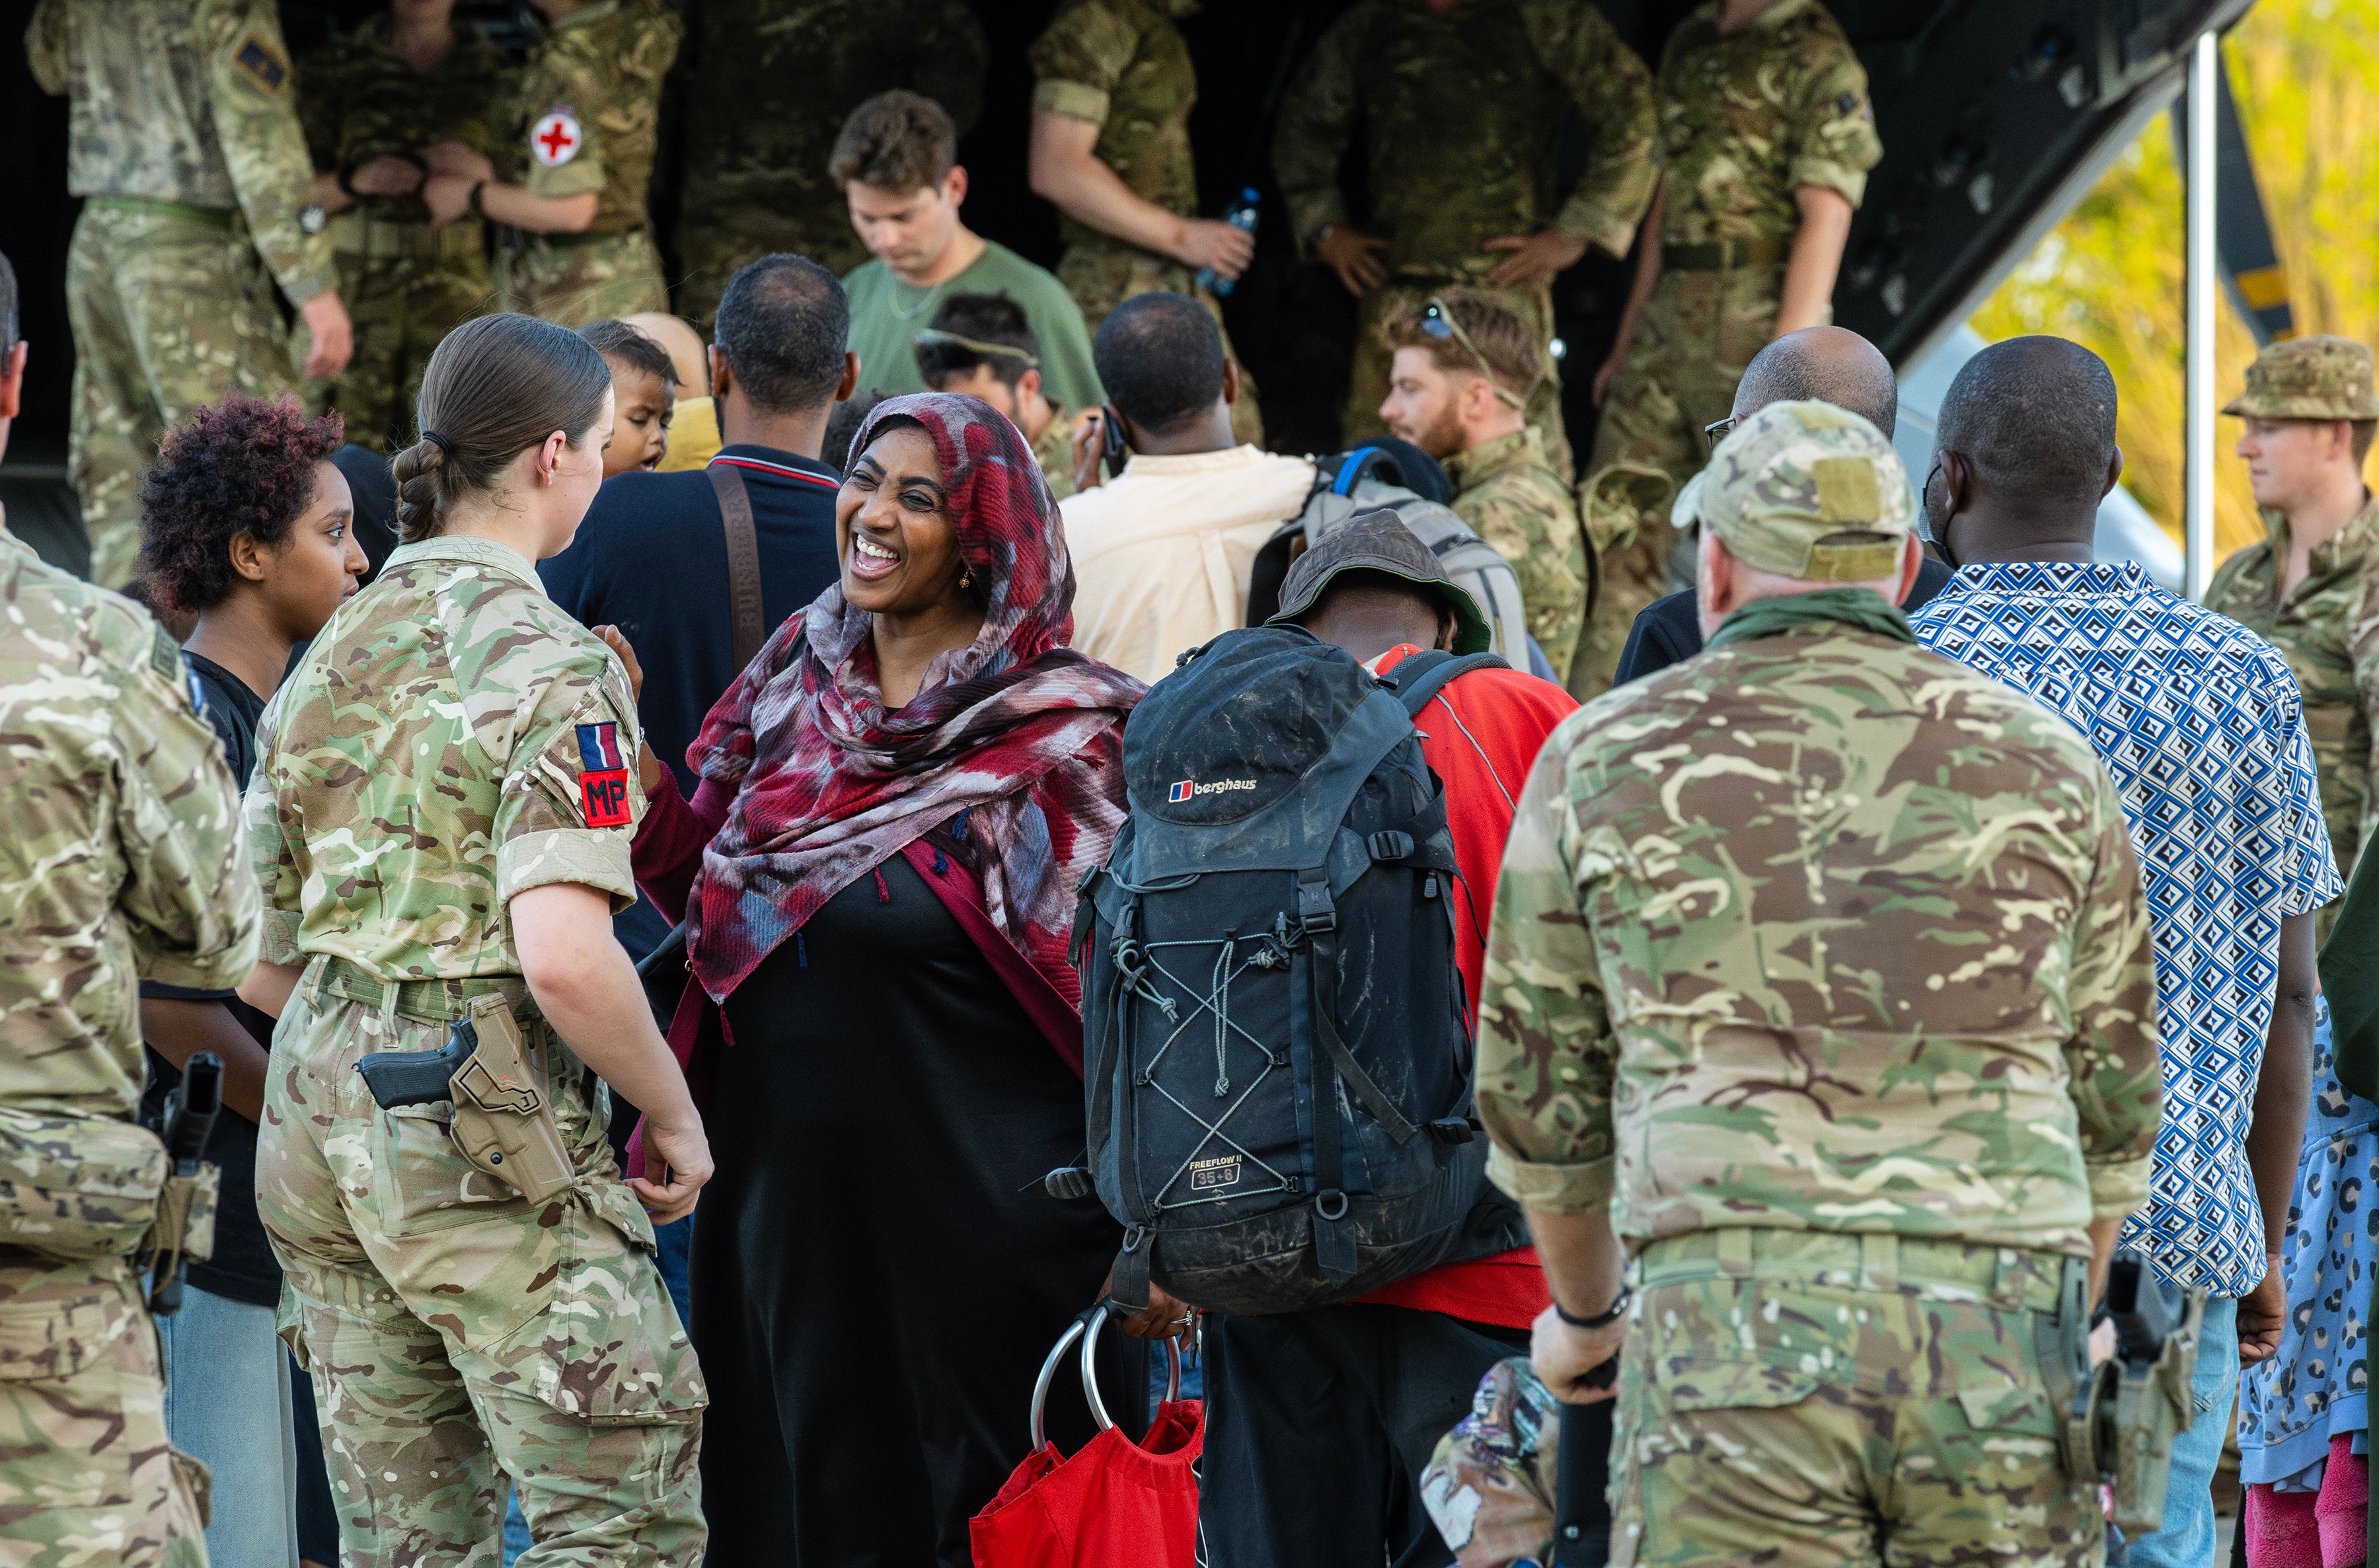 RAF Personnel assisting refugees onto the aircraft